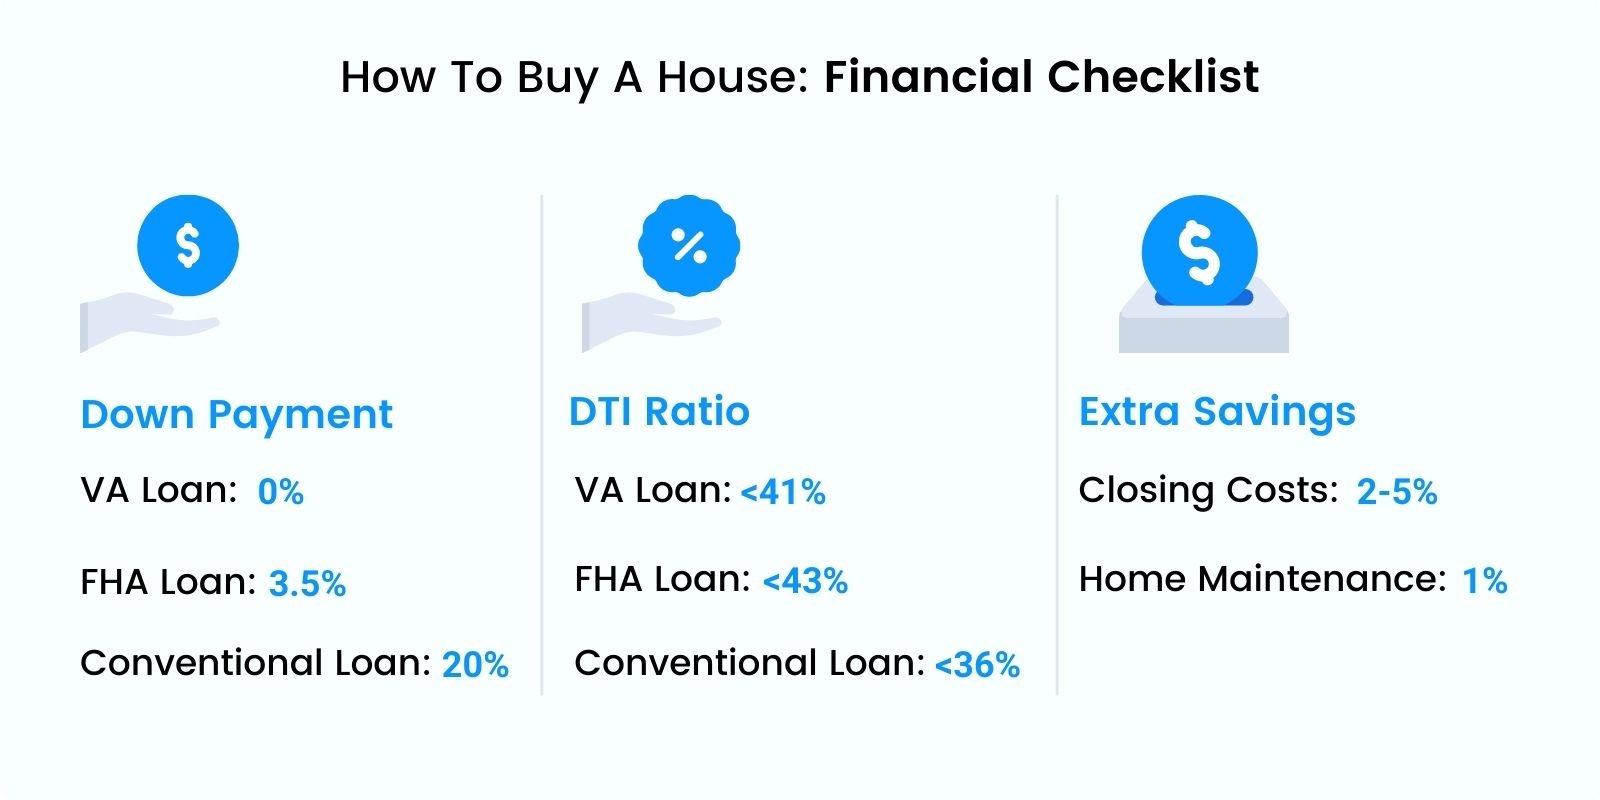 Buying a Home Financial Checklist